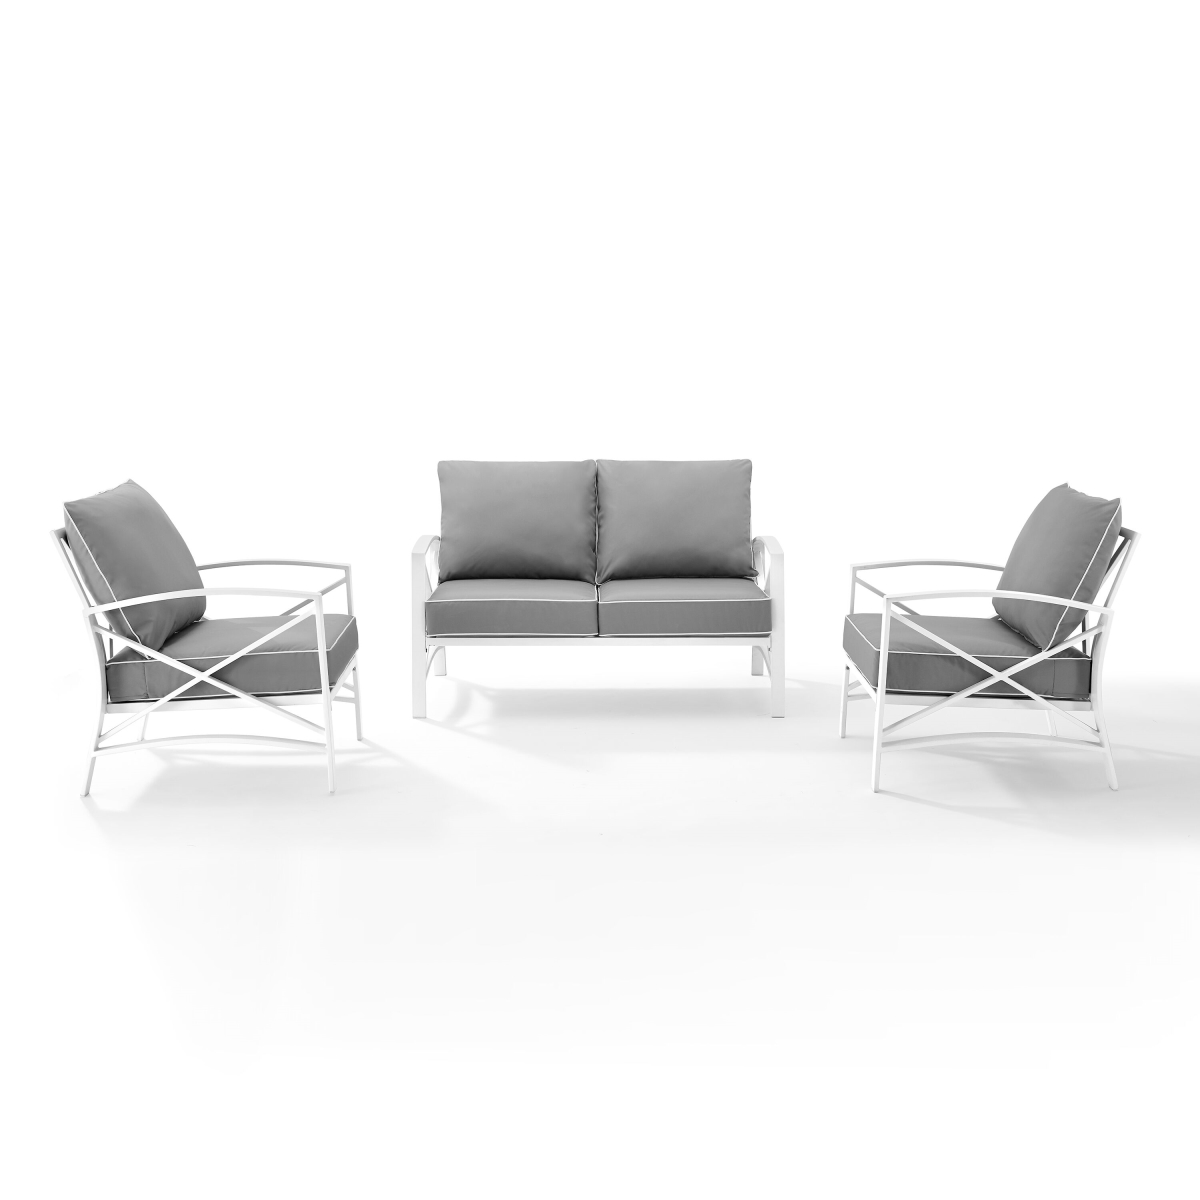 Ko60011wh-gy Kaplan 3-piece Outdoor Seating Set In White With Gray Cushions